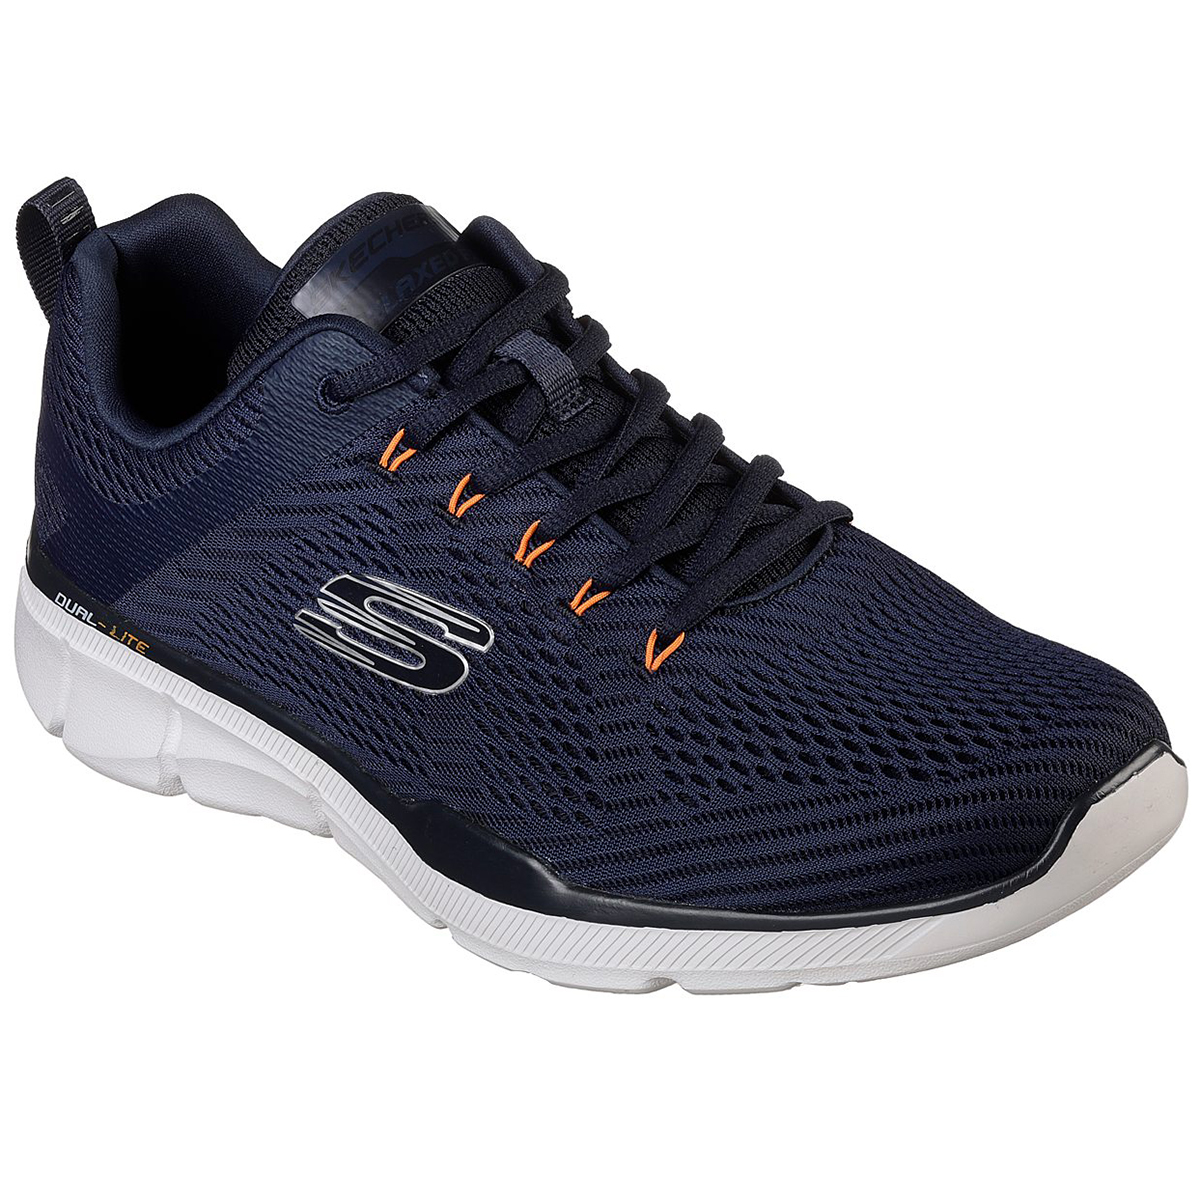 Skechers Men's Relaxed Fit: Equalizer 3.0 Sneakers, Extra Wide - Blue, 10